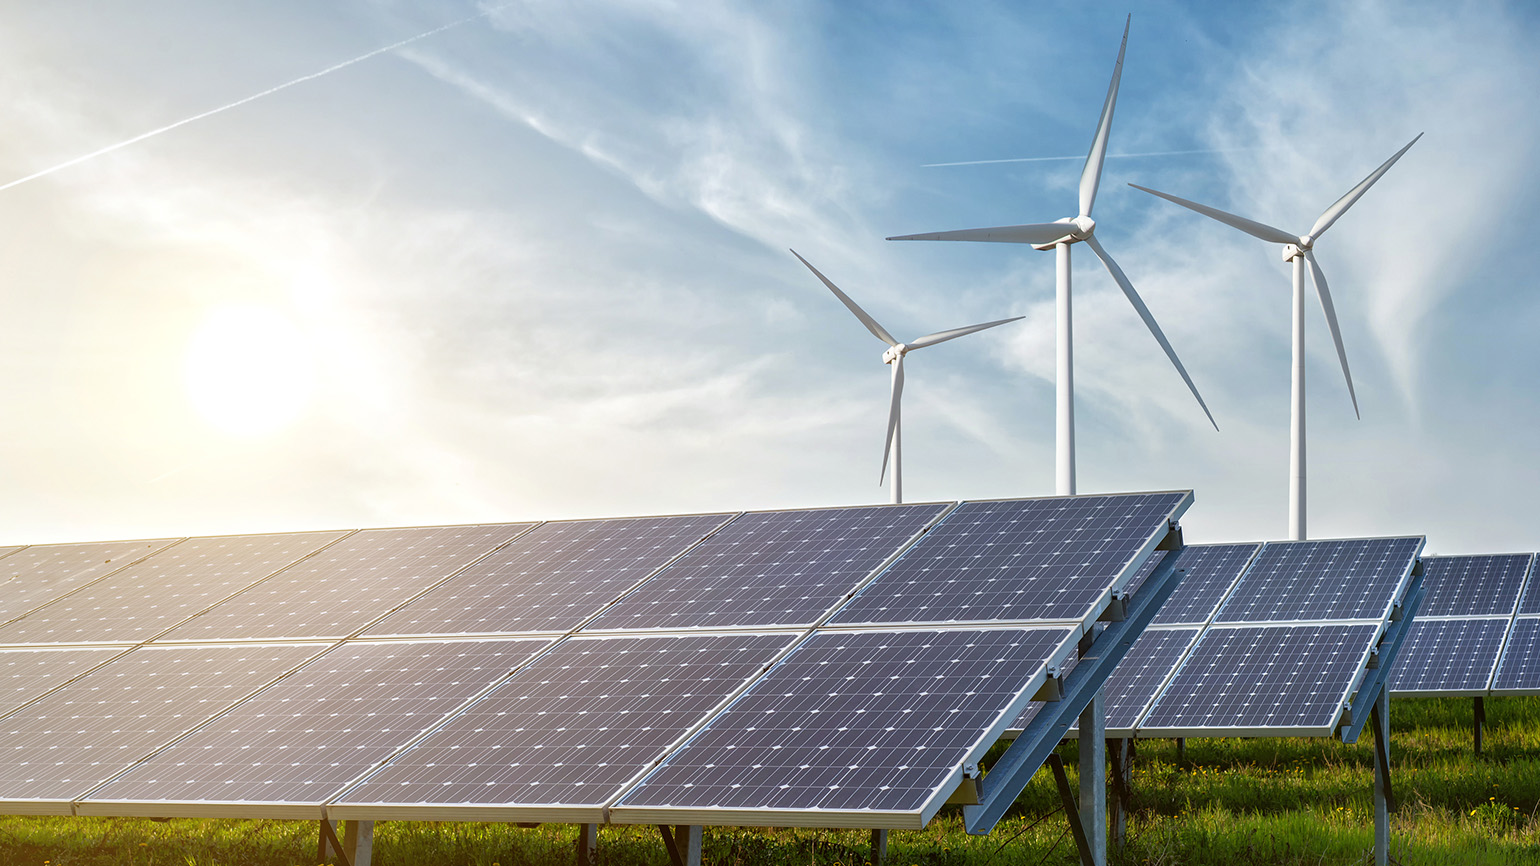 Lead batteries store energy generated by wind turbines and solar panels.